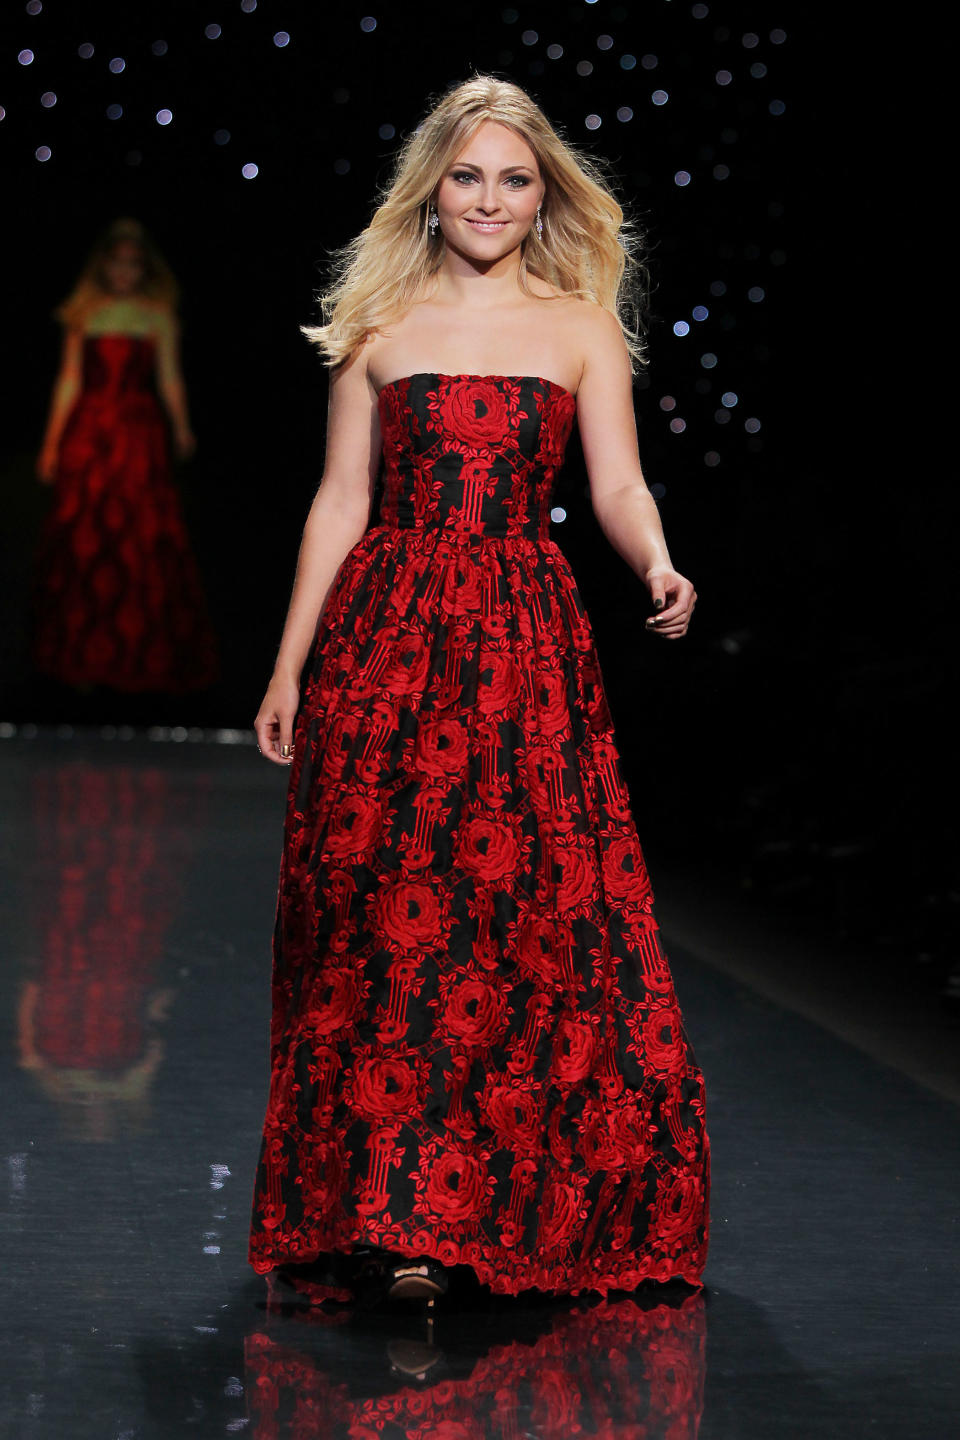 This Feb. 6, 2014 photo released by Starpix shows actress AnnaSophia Robb wearing Alice + Olivia as she participates in the Go Red For Women-The Heart Truth Red Dress Collection show during Fashion Week in New York. (AP Photo/Starpix, Amanda Schwab)